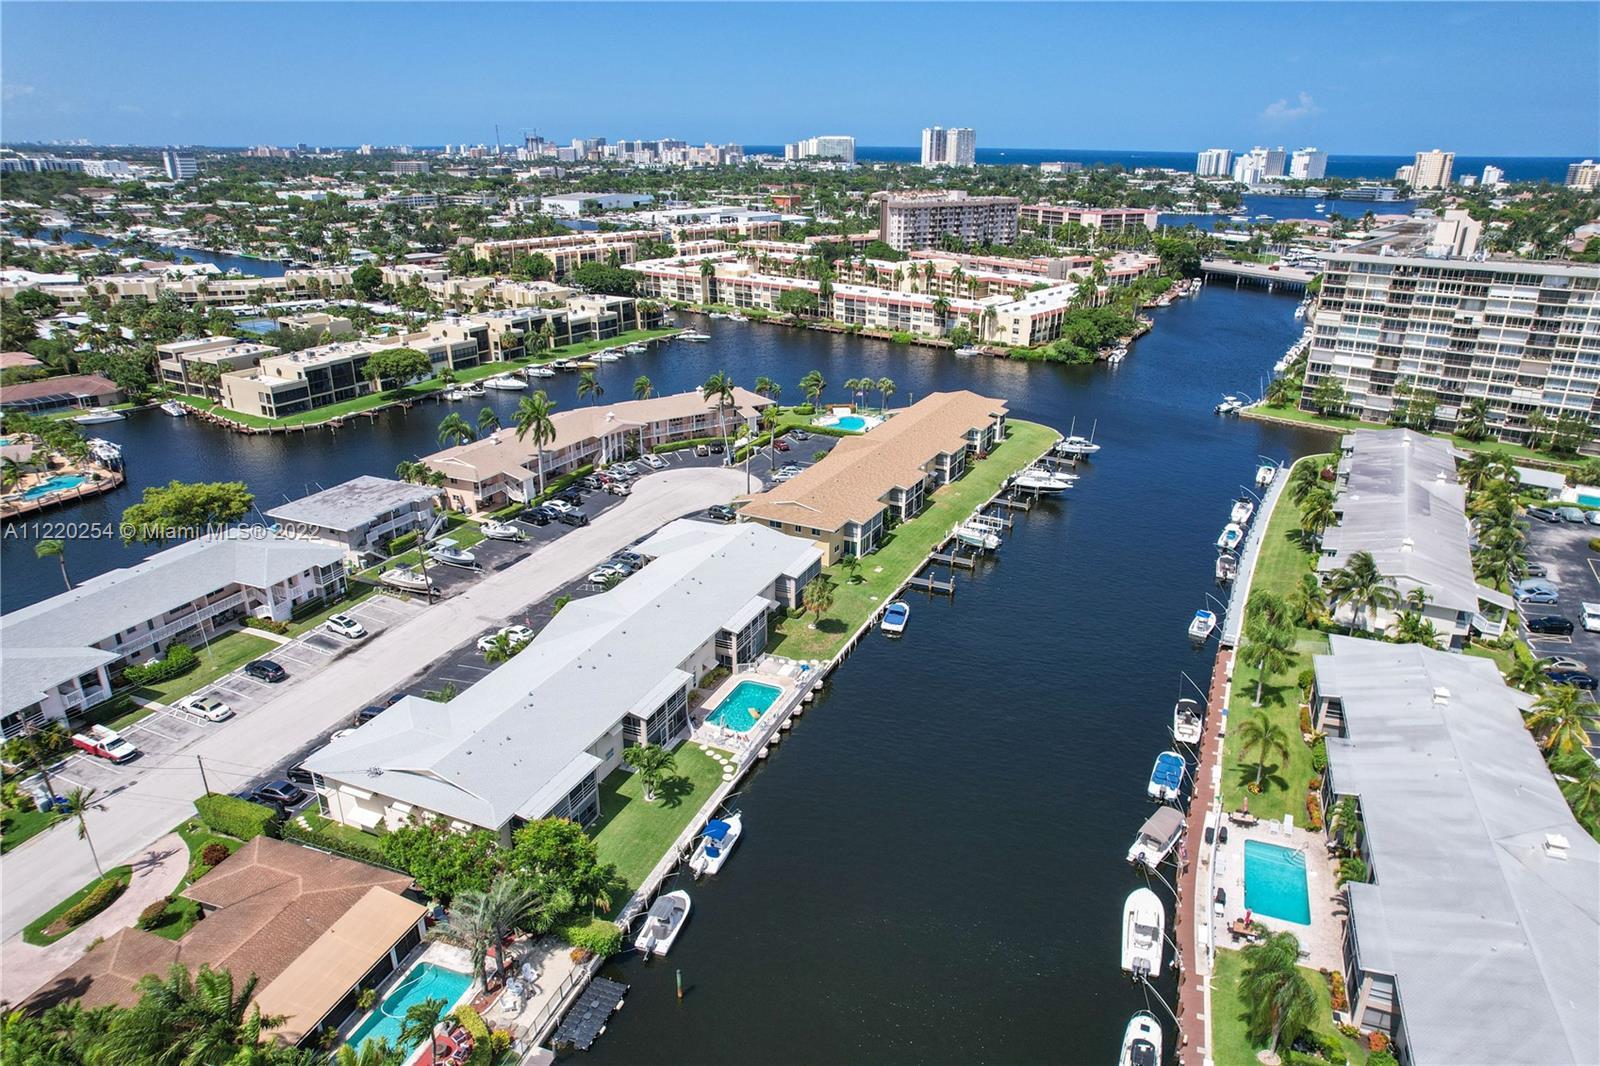 Best waterfront value in Pompano Beach, FL. Tastefully updated, 2 bed, 1 bath, waterfront property w